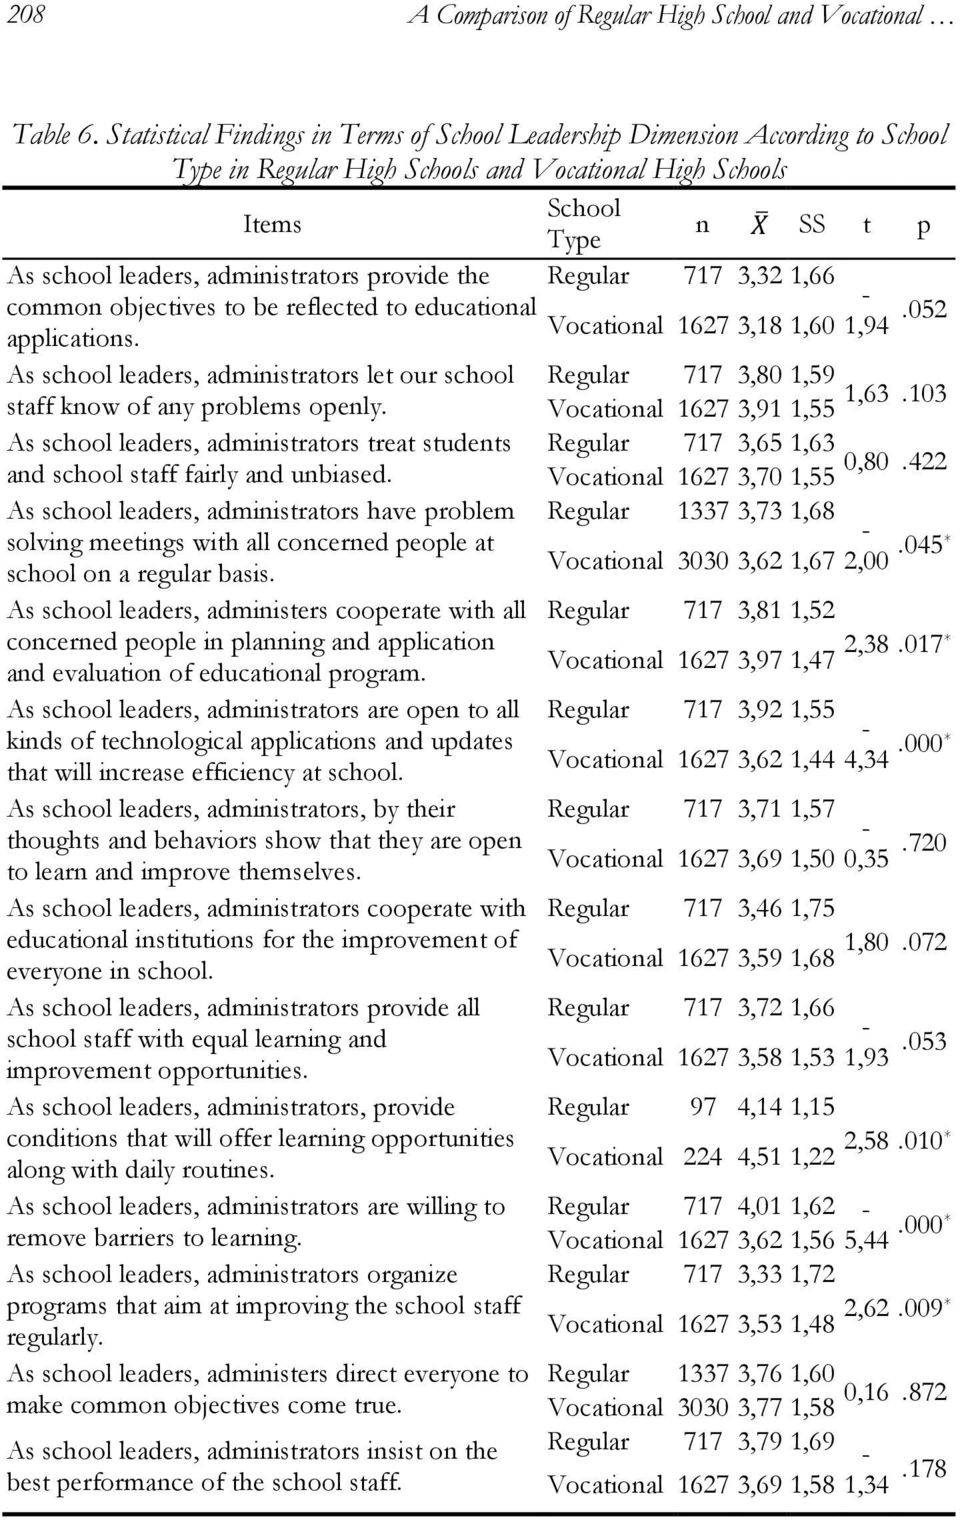 1,66 common objectives to be reflected to educational applications. Vocational 1627 3,18 1,60 1,94.